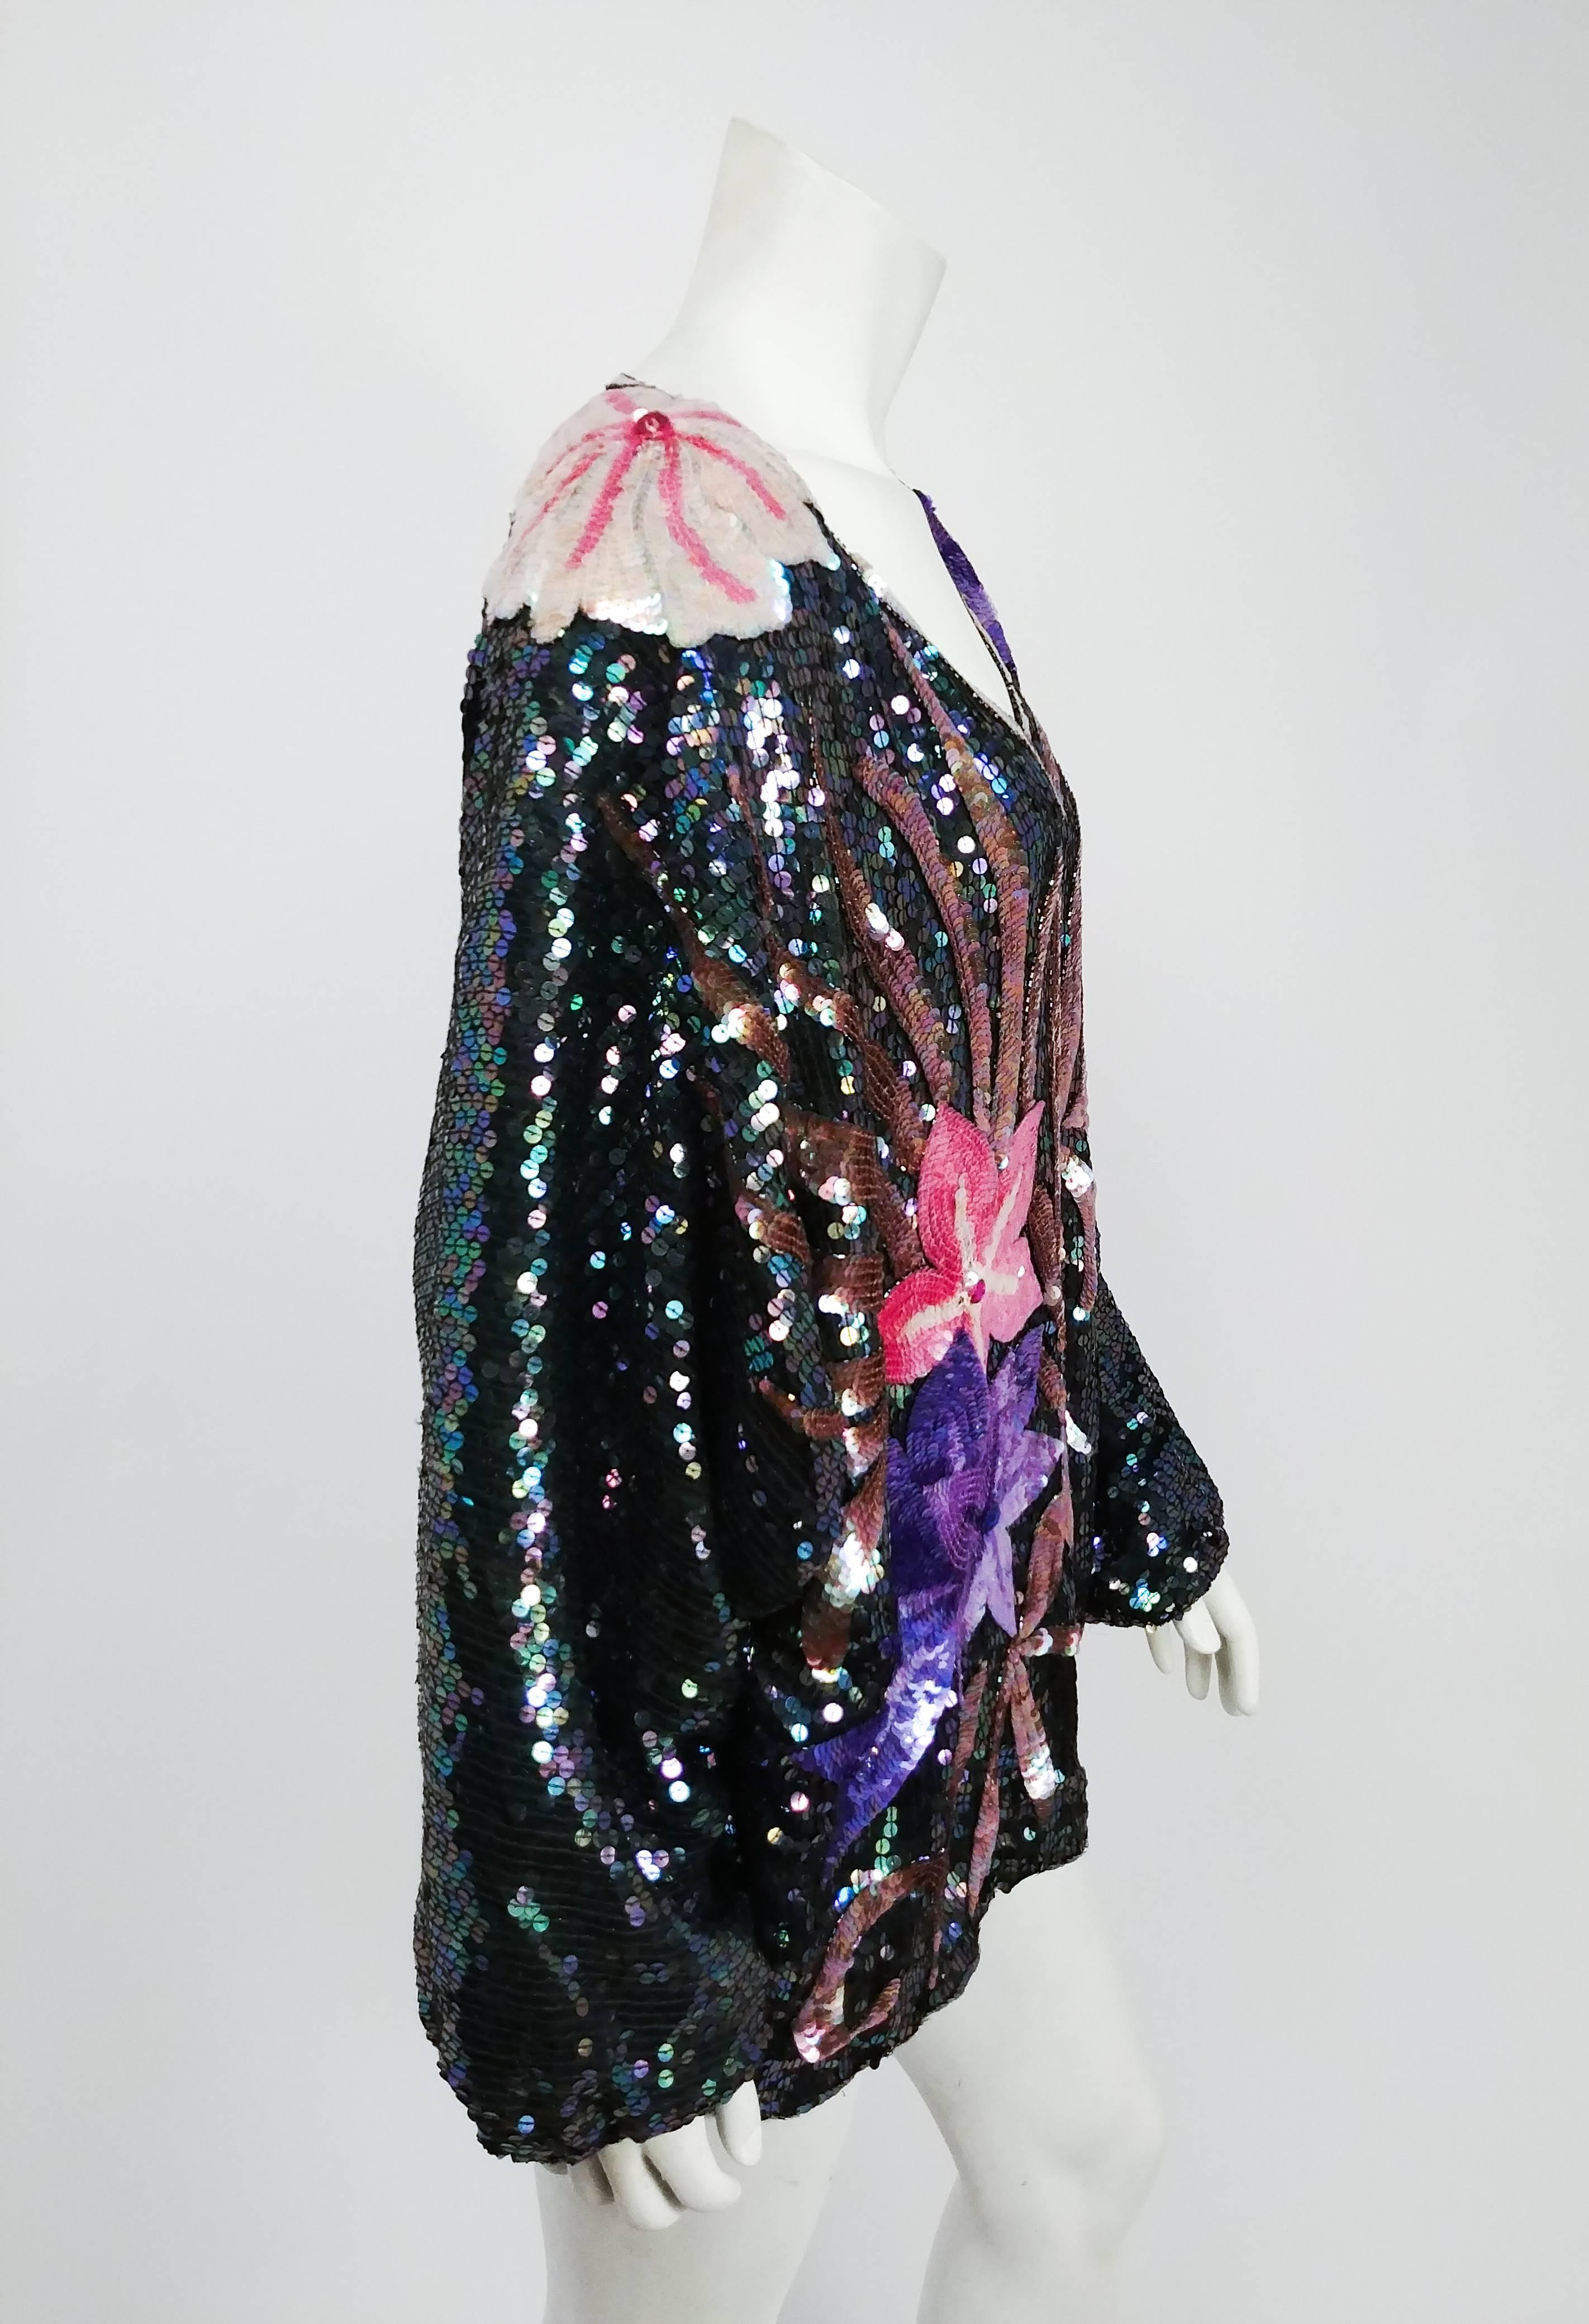 1980s Judith Ann Iridescent Black Oversized Top w/ Flowers. Sequins sewn on to silk base. Padded shoulders. 